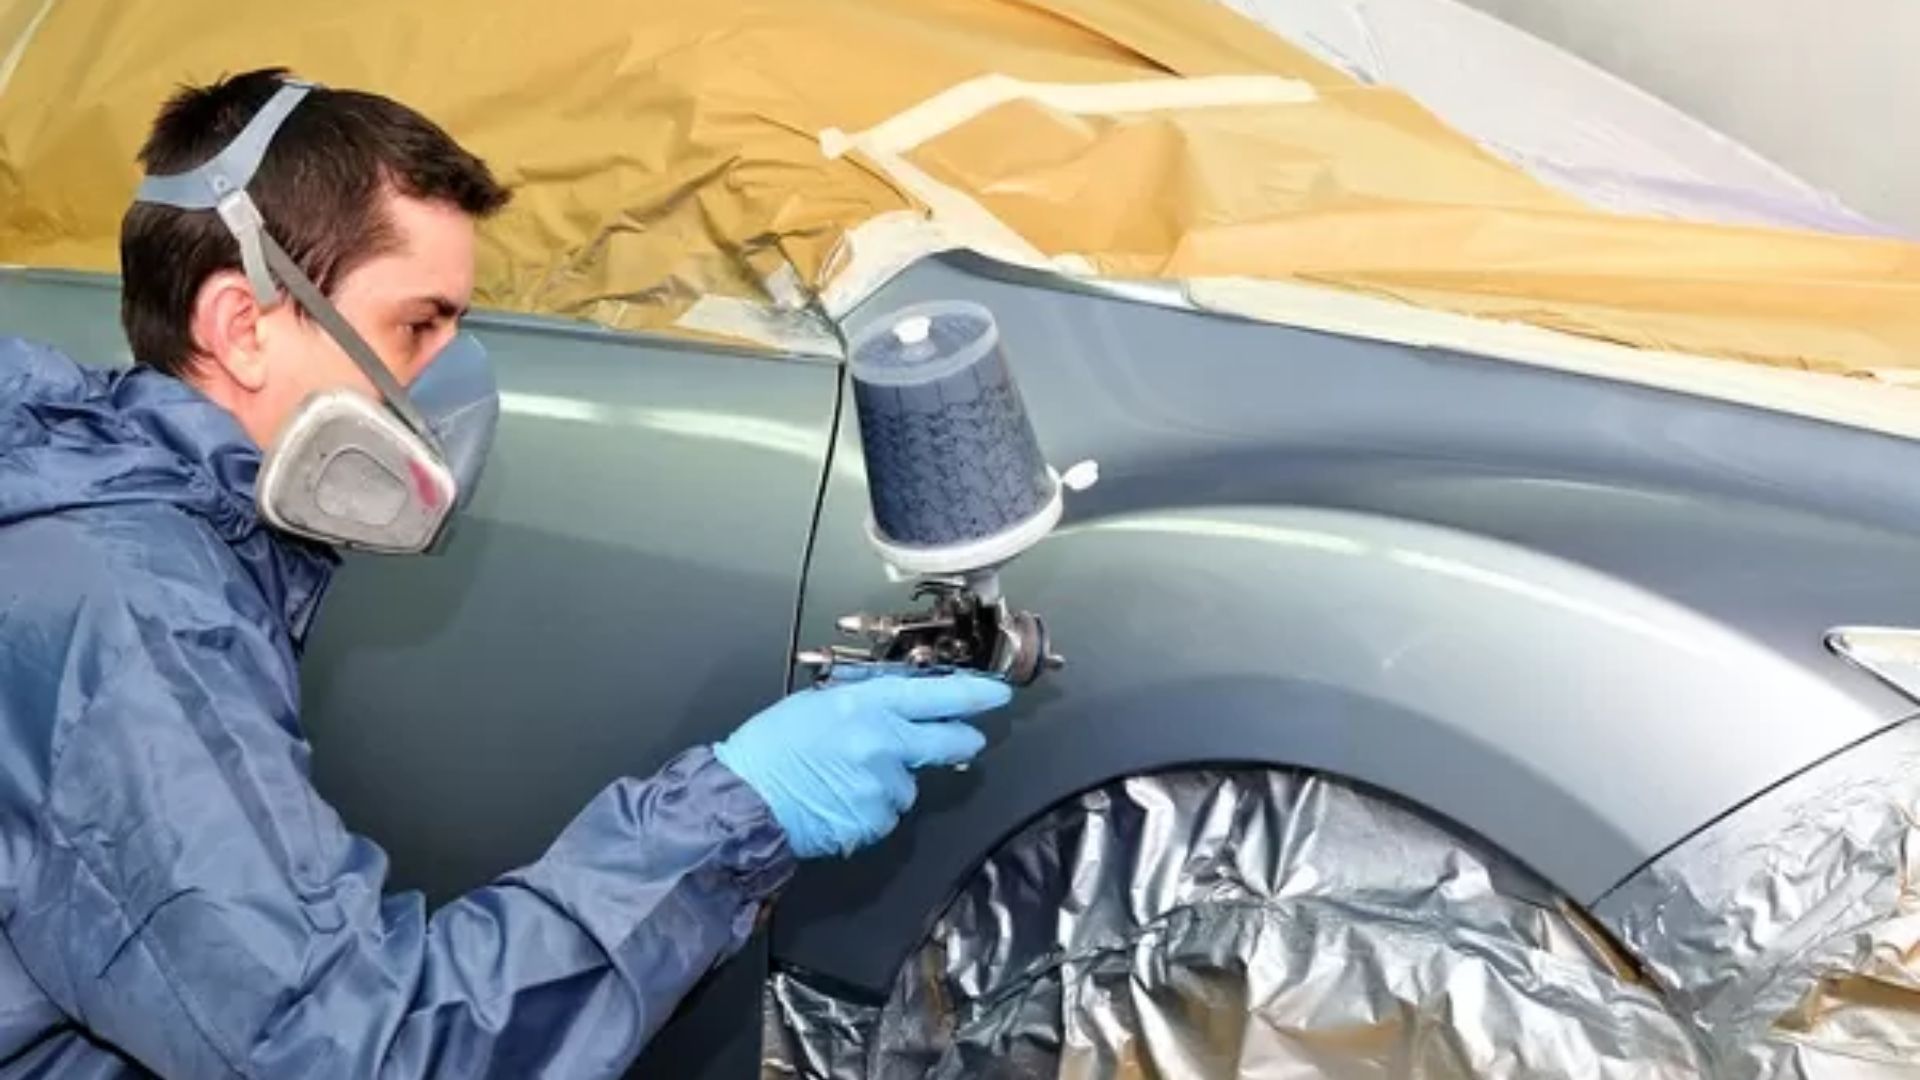 How to Prevent Oxidation and Fading of Your Car's Paint